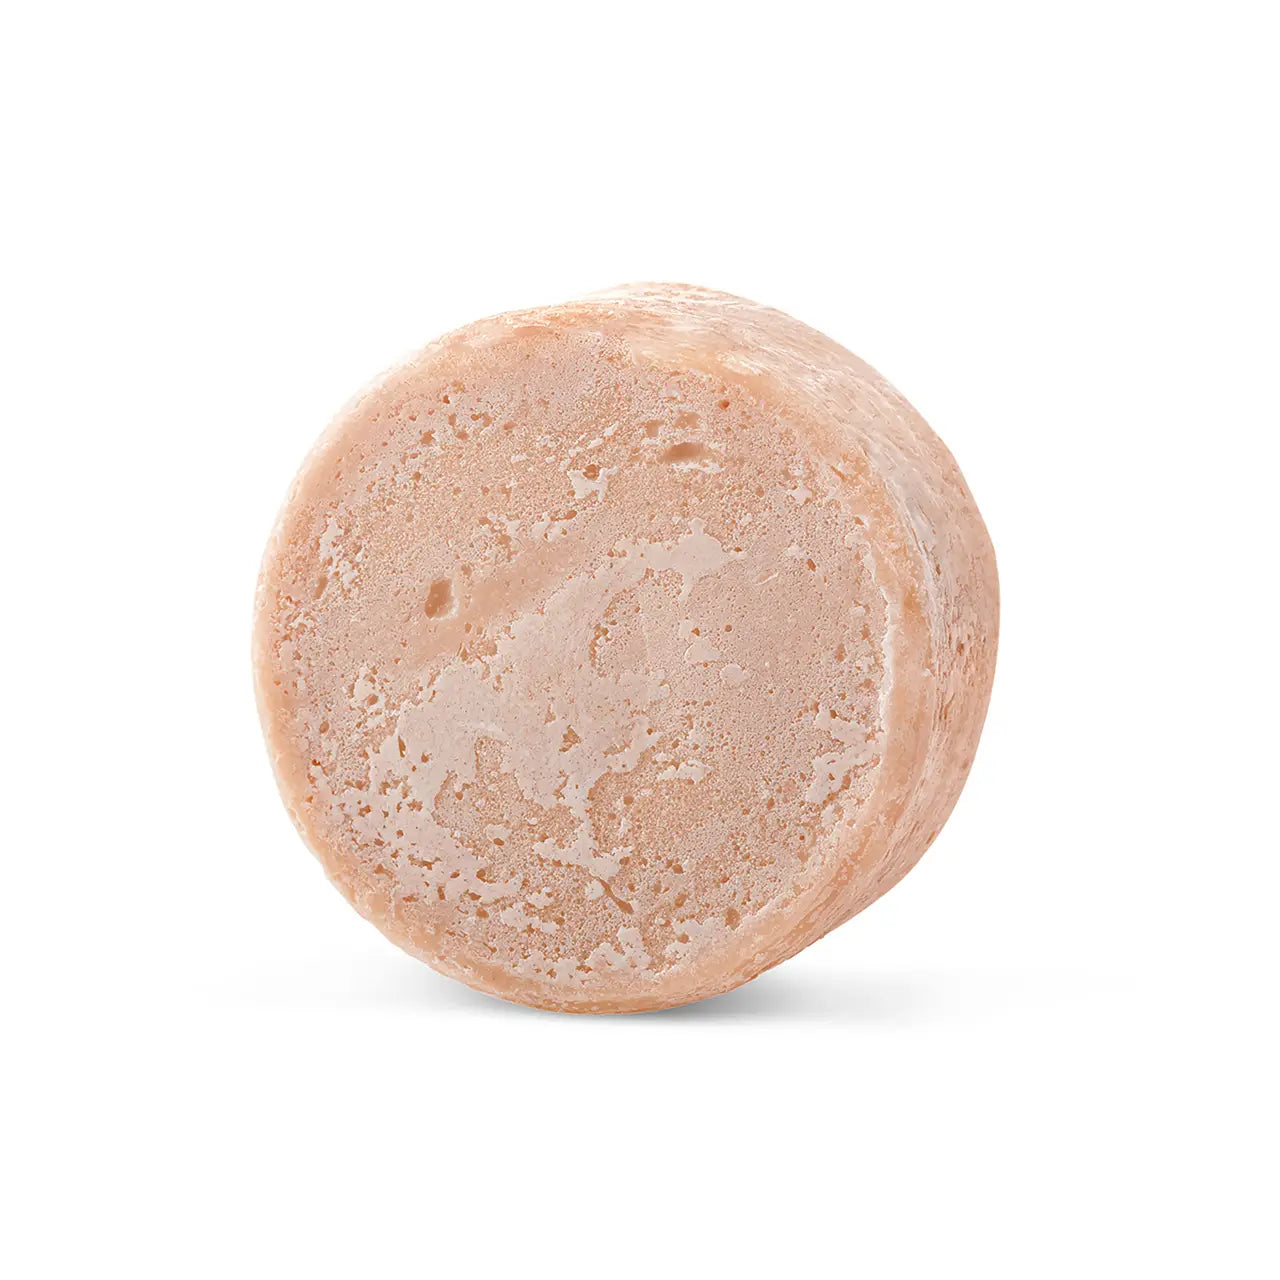 Shampoo Bar - Rice Water Protein - Strengthening